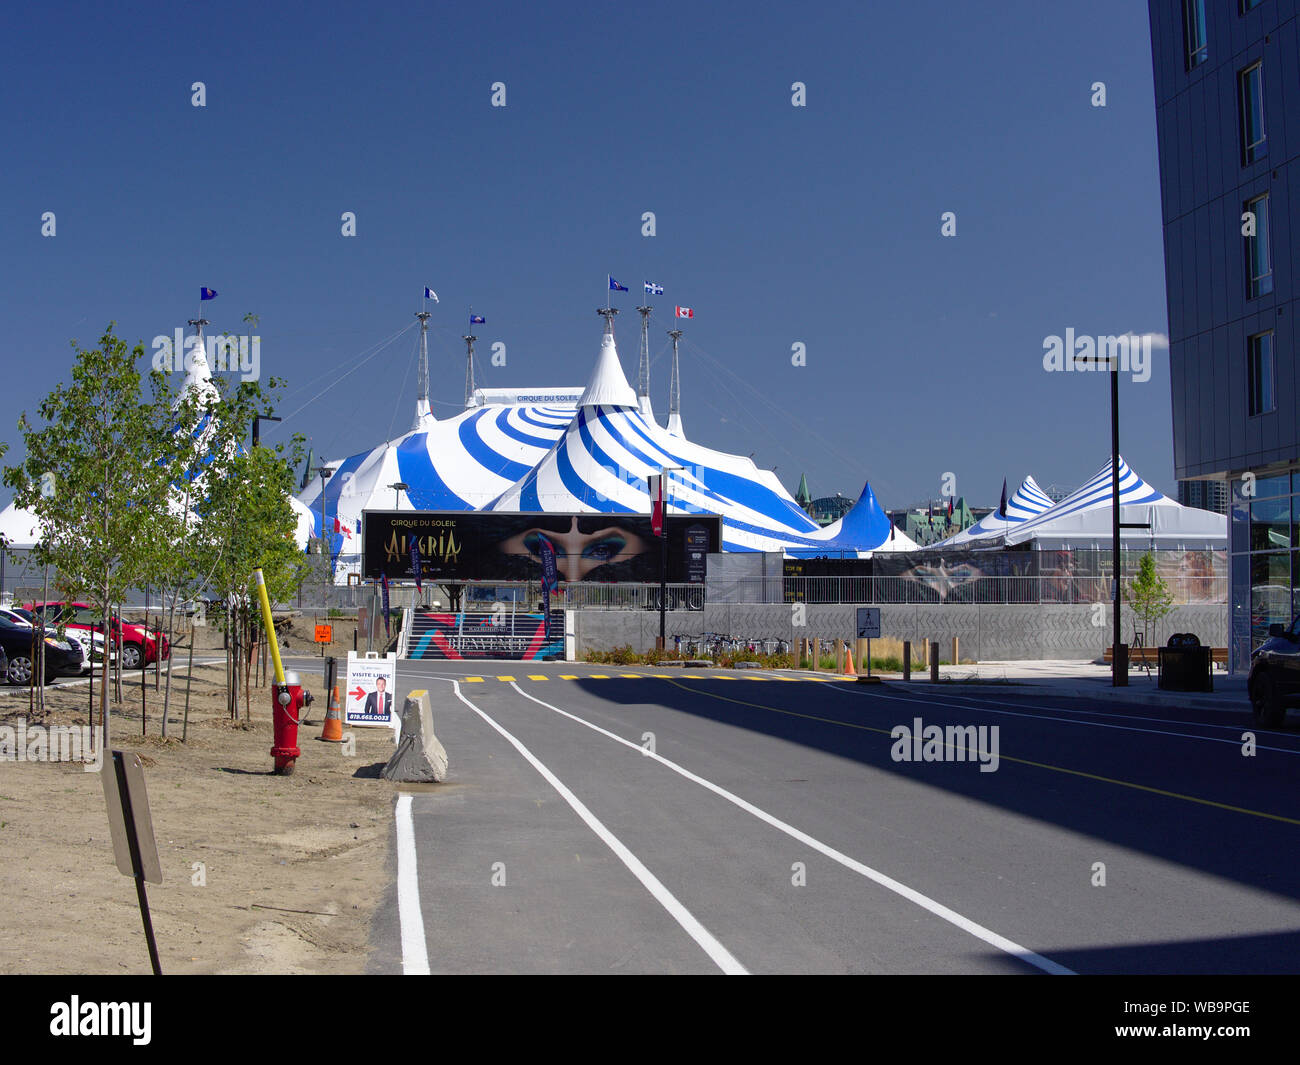 Circus tent / big top with Cirque du Soleil's Alegria playing at the Zibi site, Gatineau, Quebec, Canada. Stock Photo